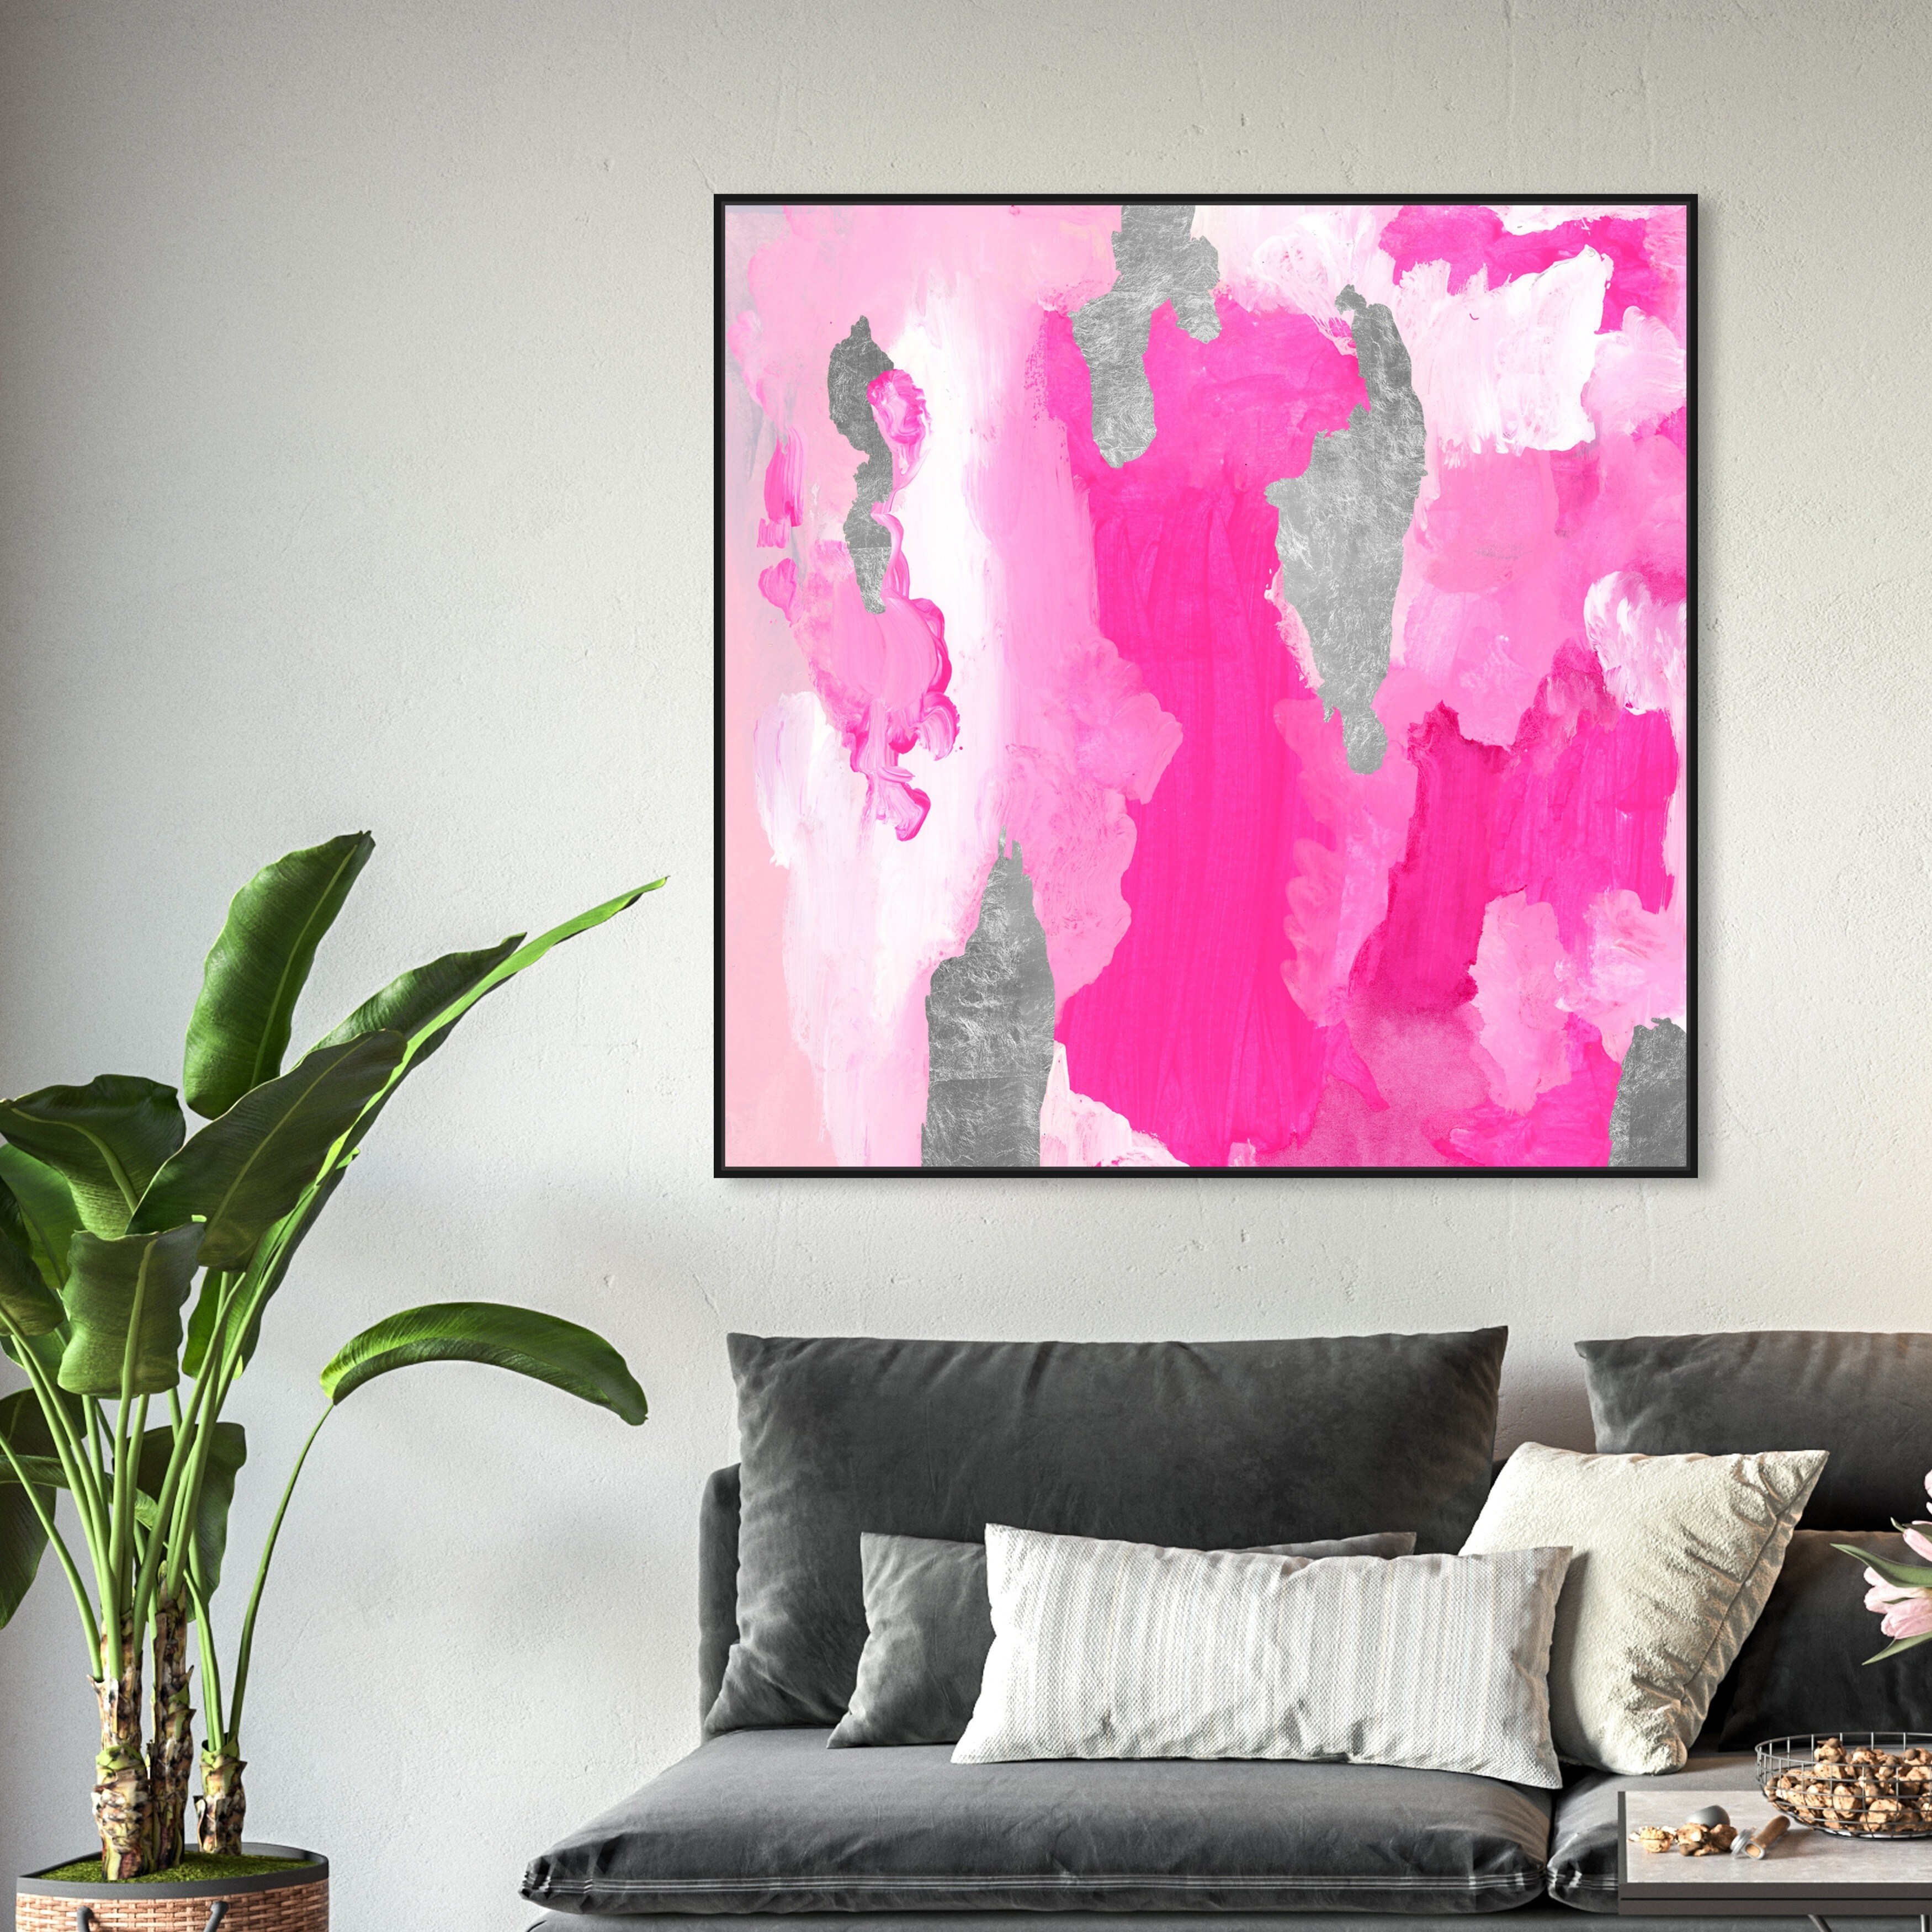 Oliver Gal 'Pink Silver Sky' Abstract Wall Art Framed Canvas Print